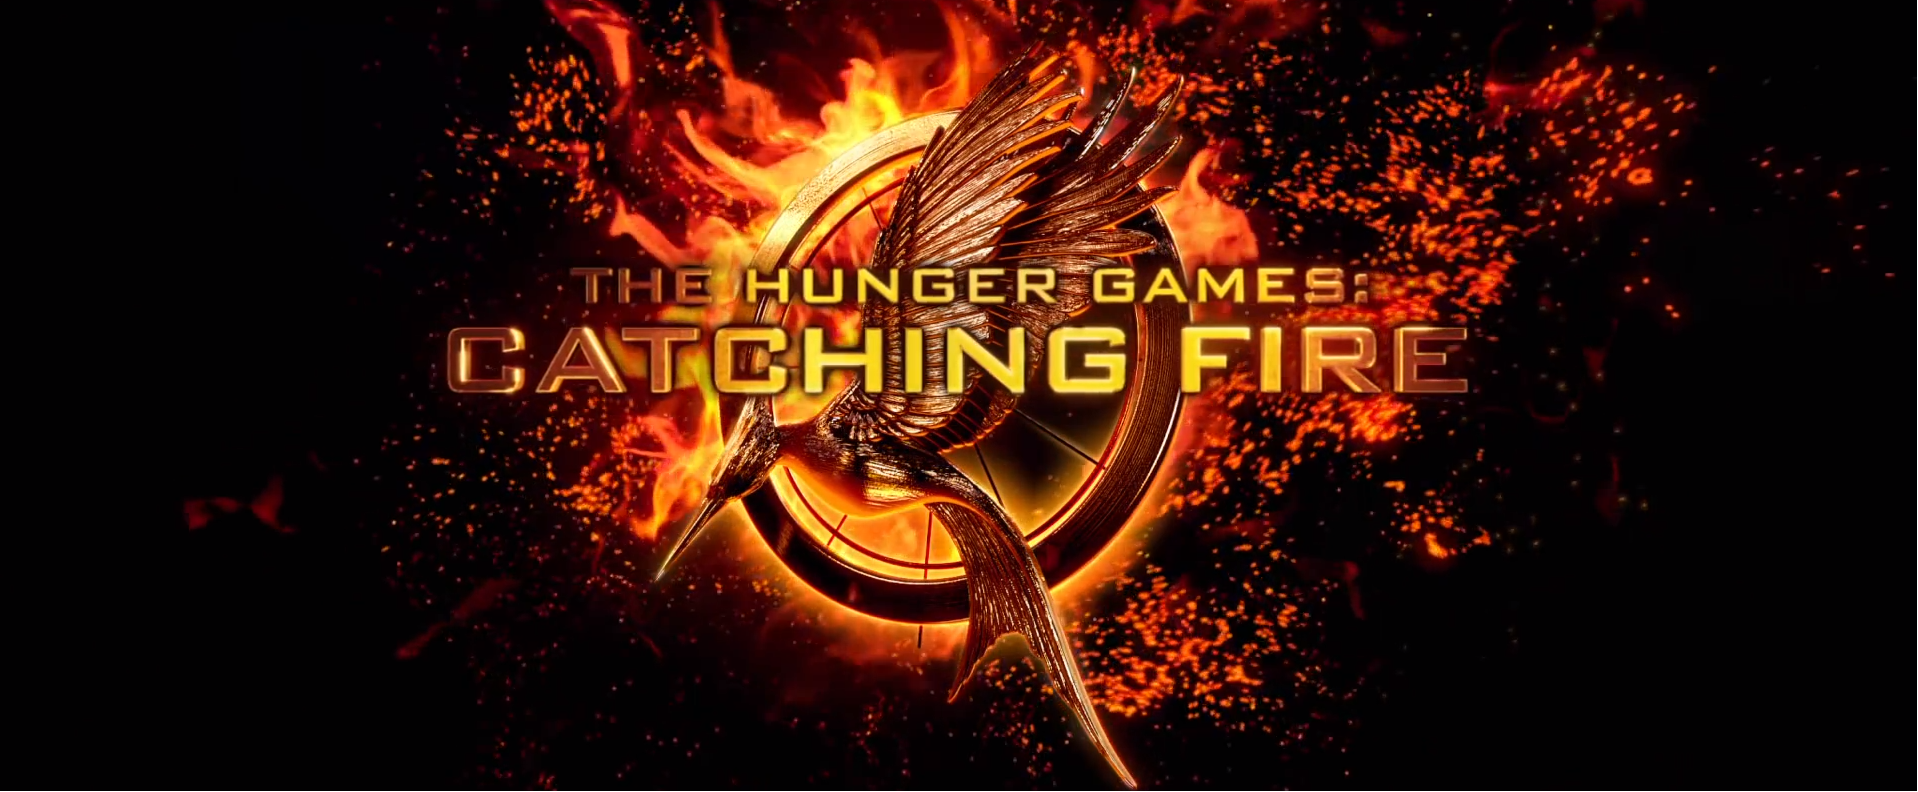 download the last version for windows The Hunger Games: Catching Fire